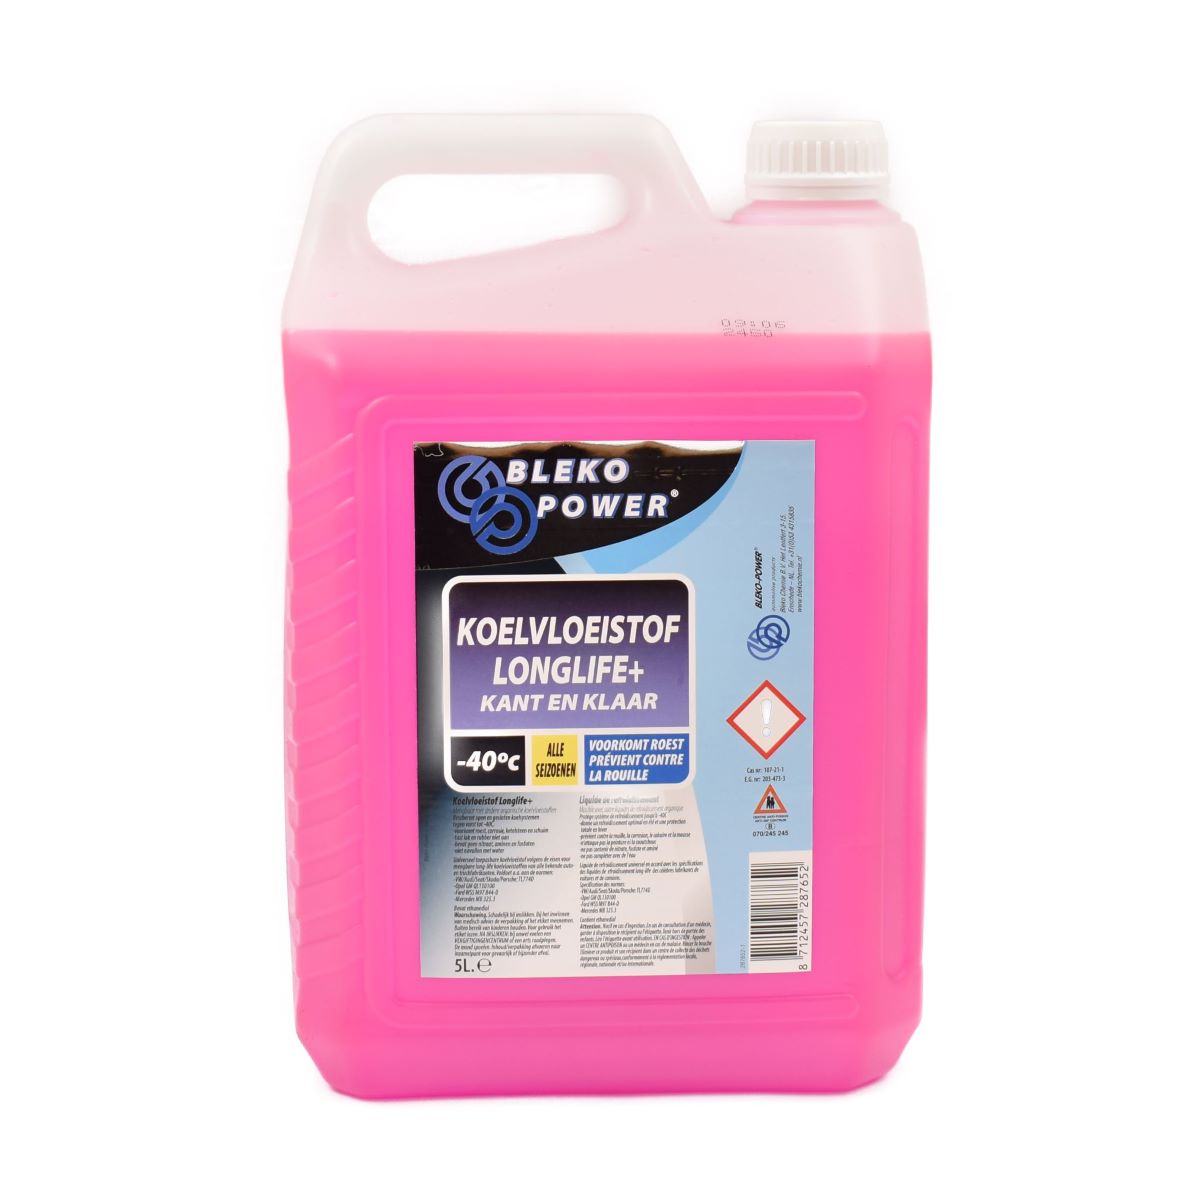 COOLANT 5 LITERS Extra info: Content: 5 liters Ready to use Prevents rust and corrosion Up to -40C Mixable with other coolants